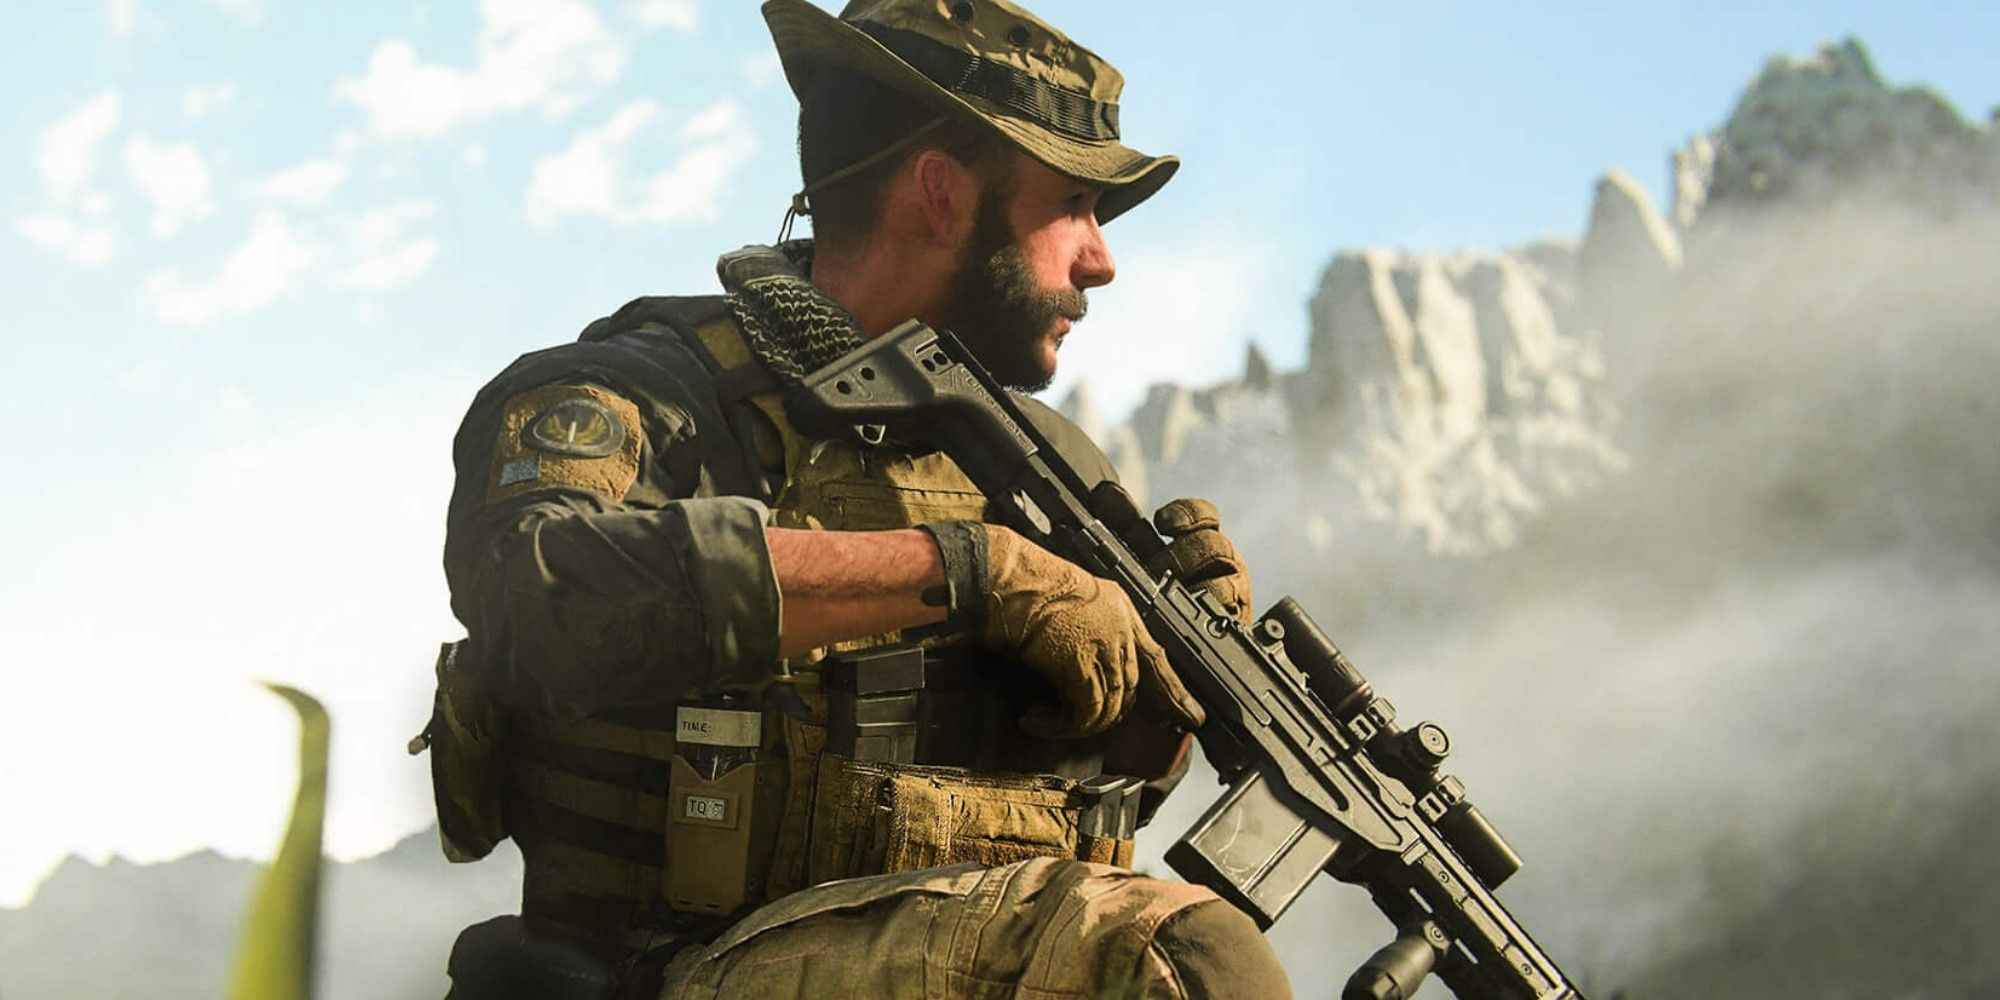 Call of Duty: Modern Warfare 3 Can Be a Classic Comeback Story for